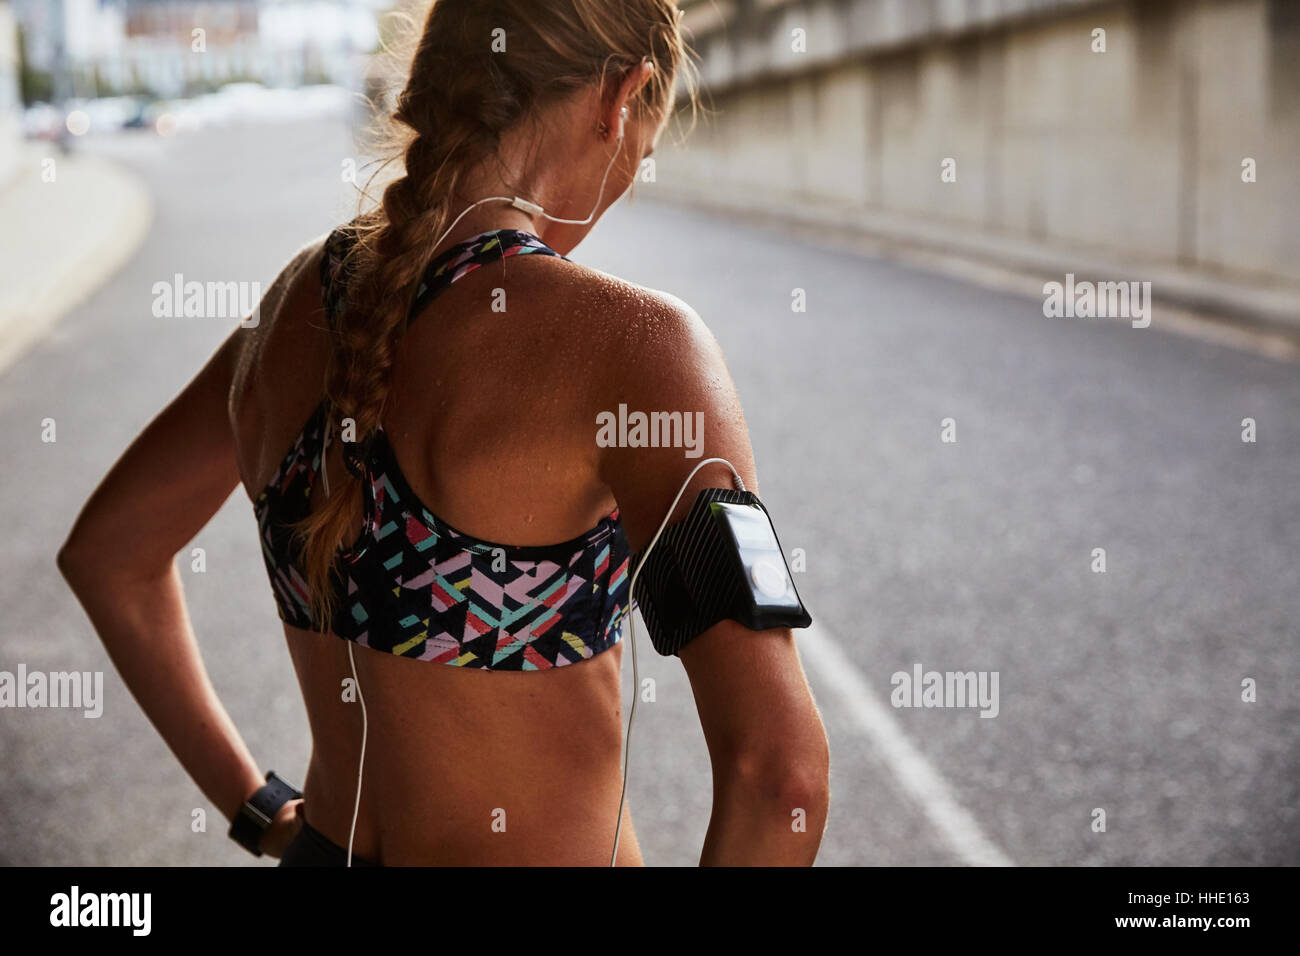 Fit female runner in sports bra with mp3 player armband and headphones resting on urban street Stock Photo